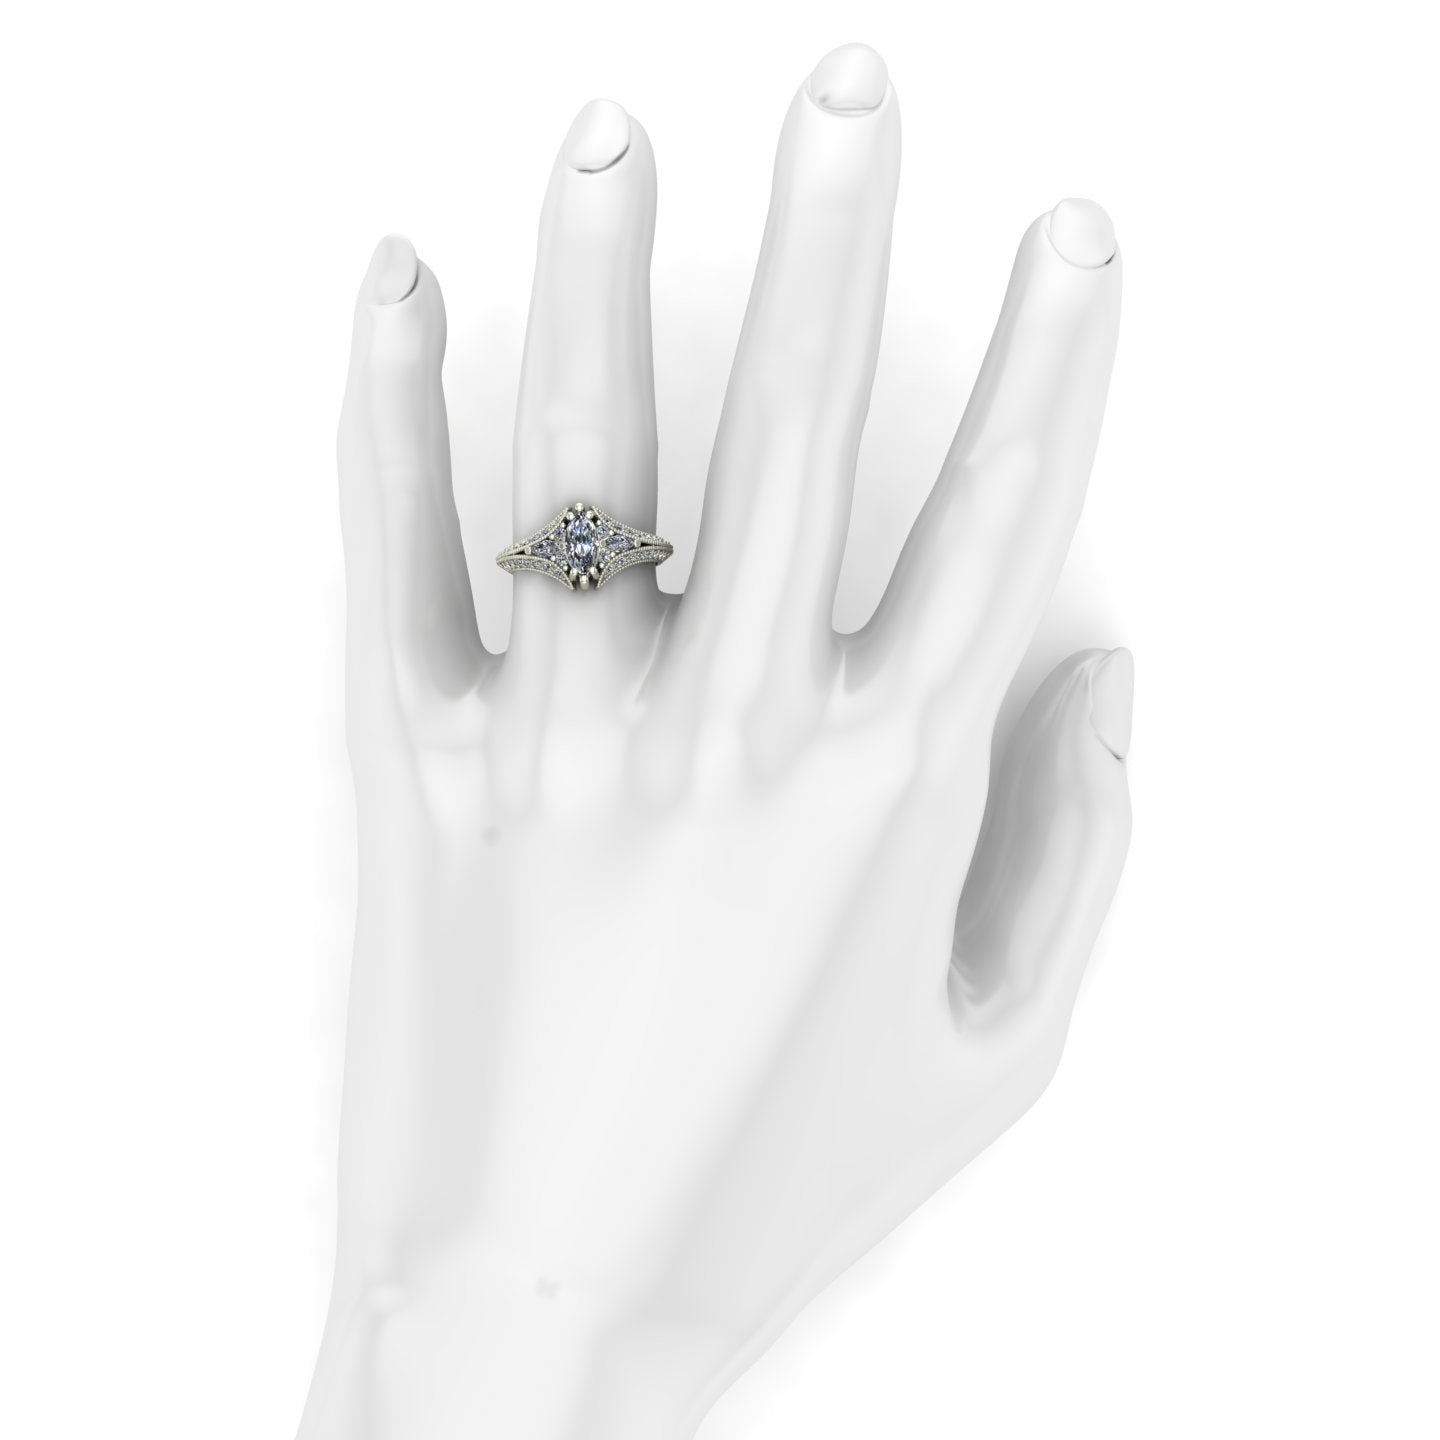 Marquise diamond engagement ring in 14k white gold – Charles Babb Designs